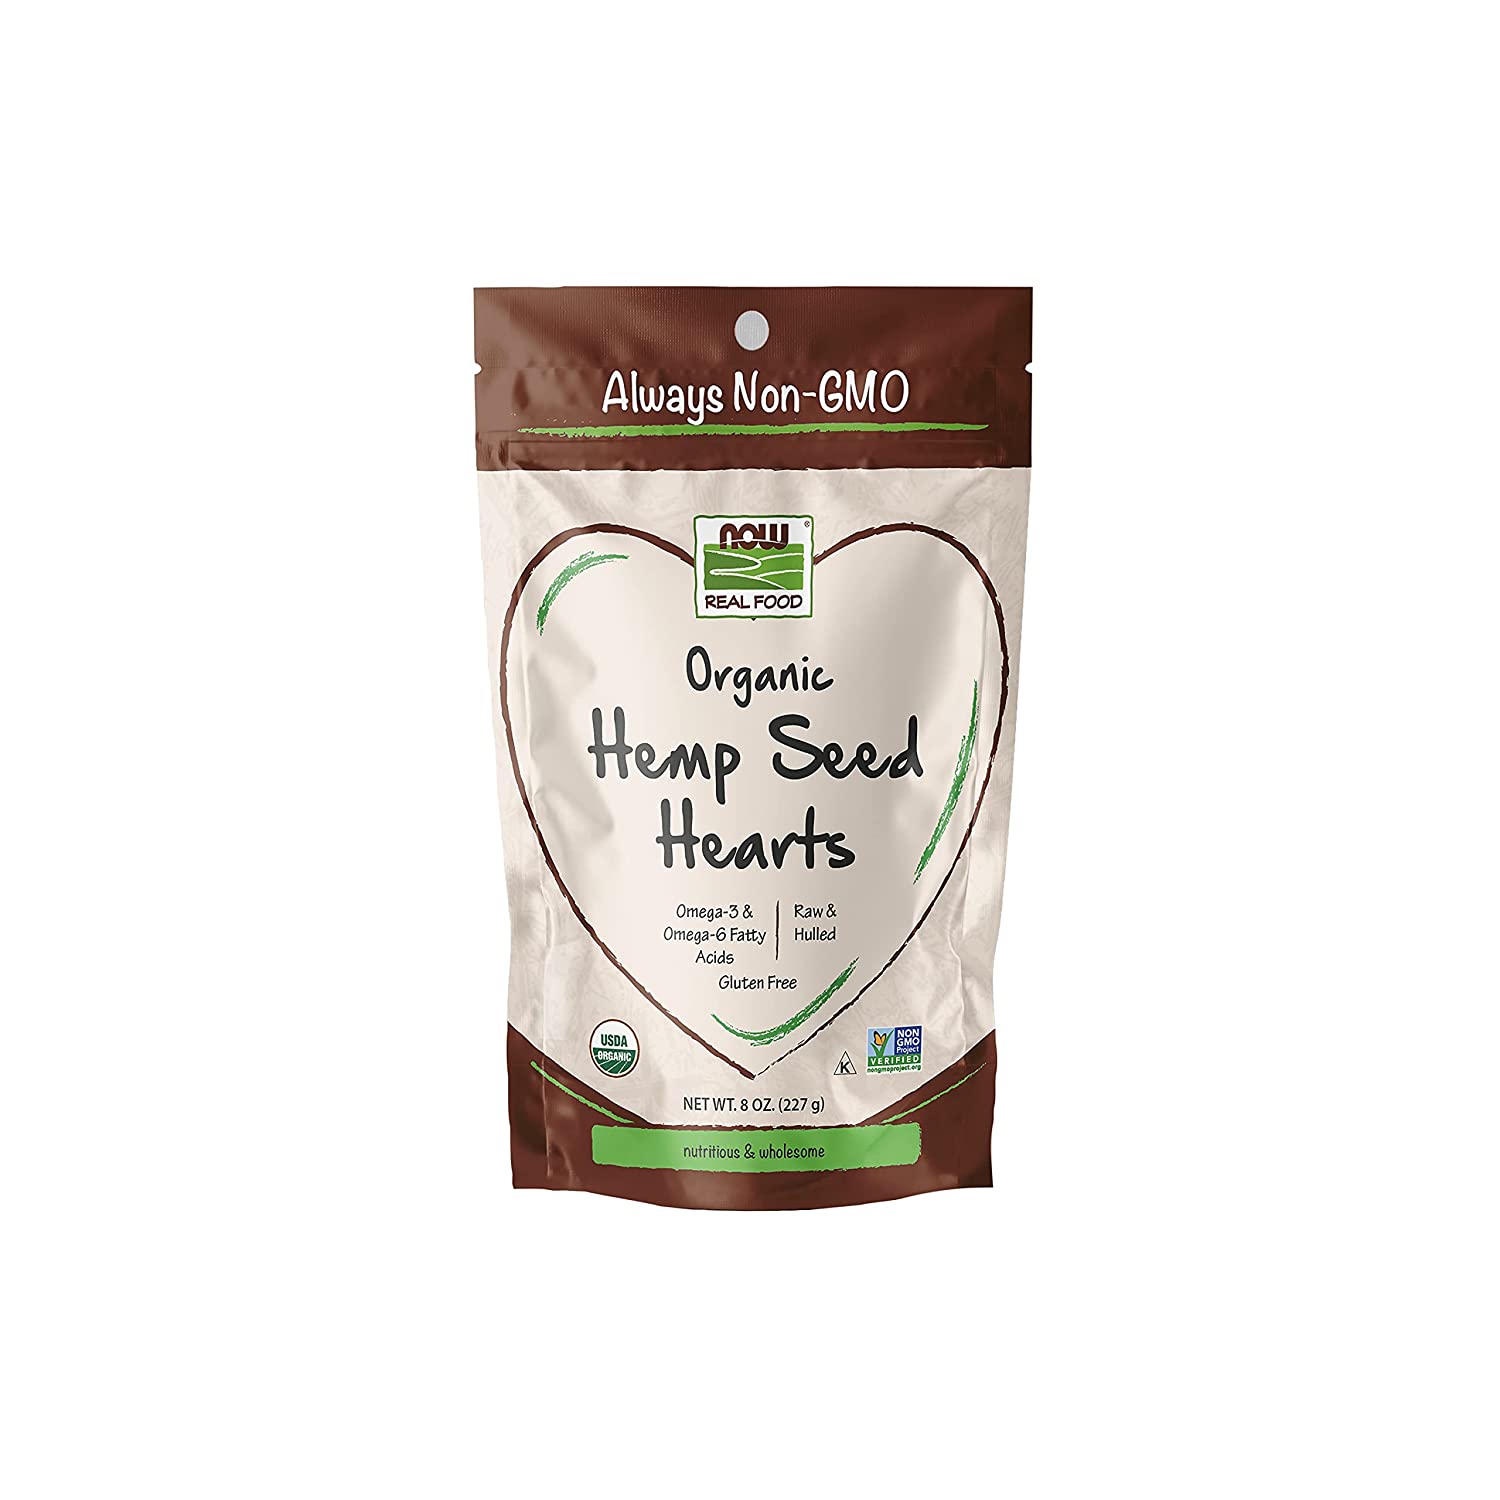 Organic Hemp Seed Hearts, High Protein & Iron, with Omega-3 and Omega-6 Fatty Acids, Raw and Hulled - 8 Oz (227g)